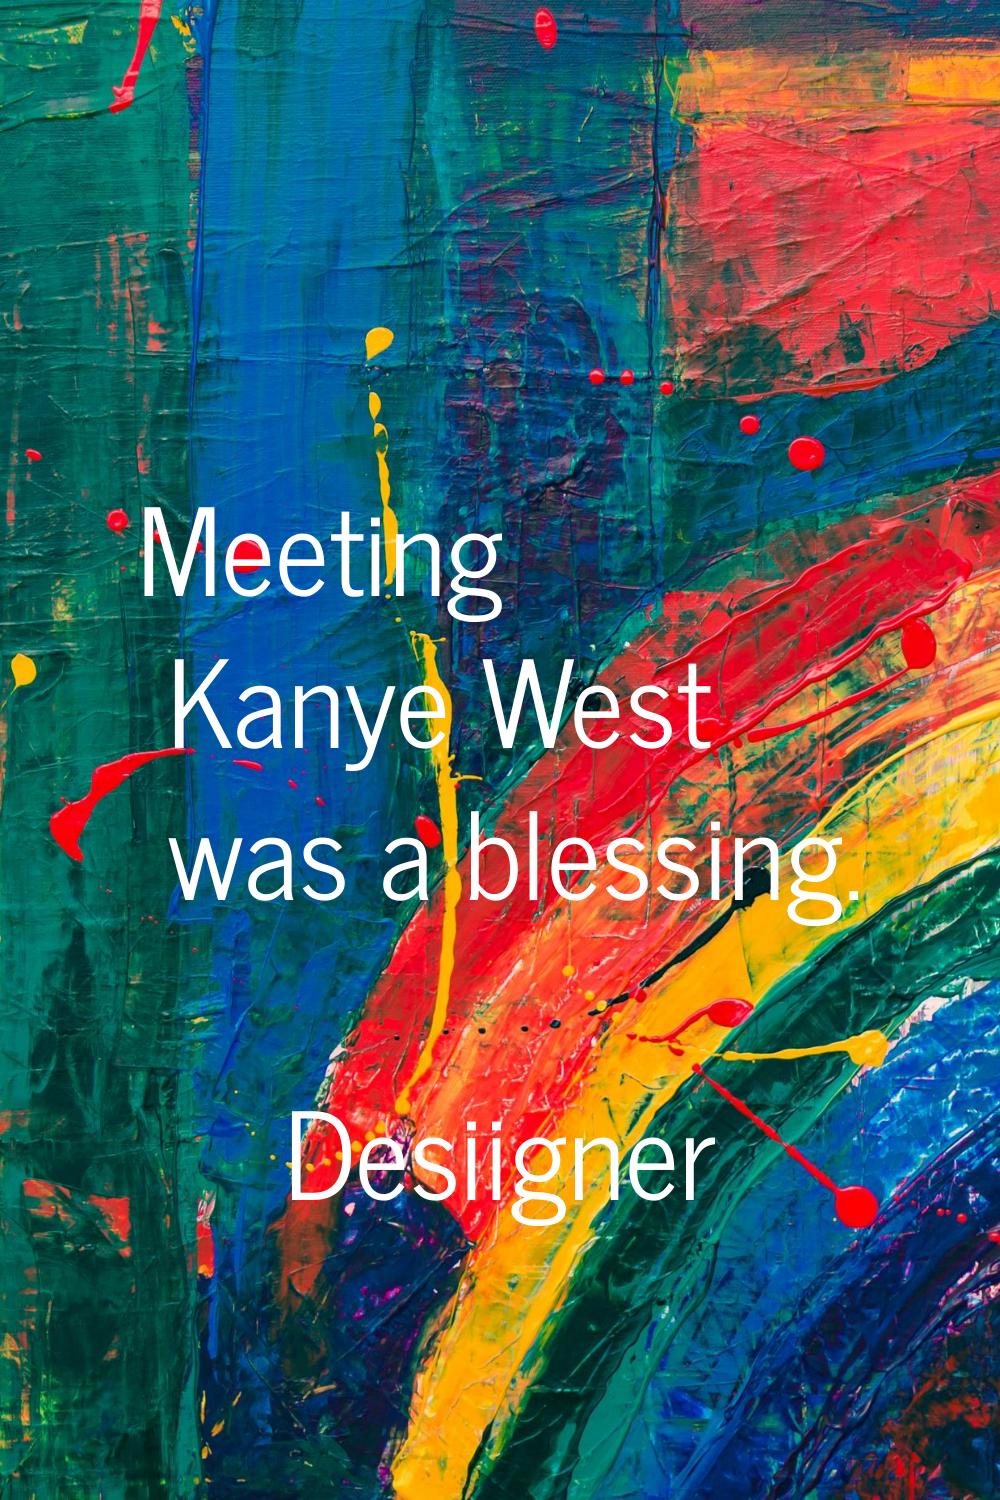 Meeting Kanye West was a blessing.